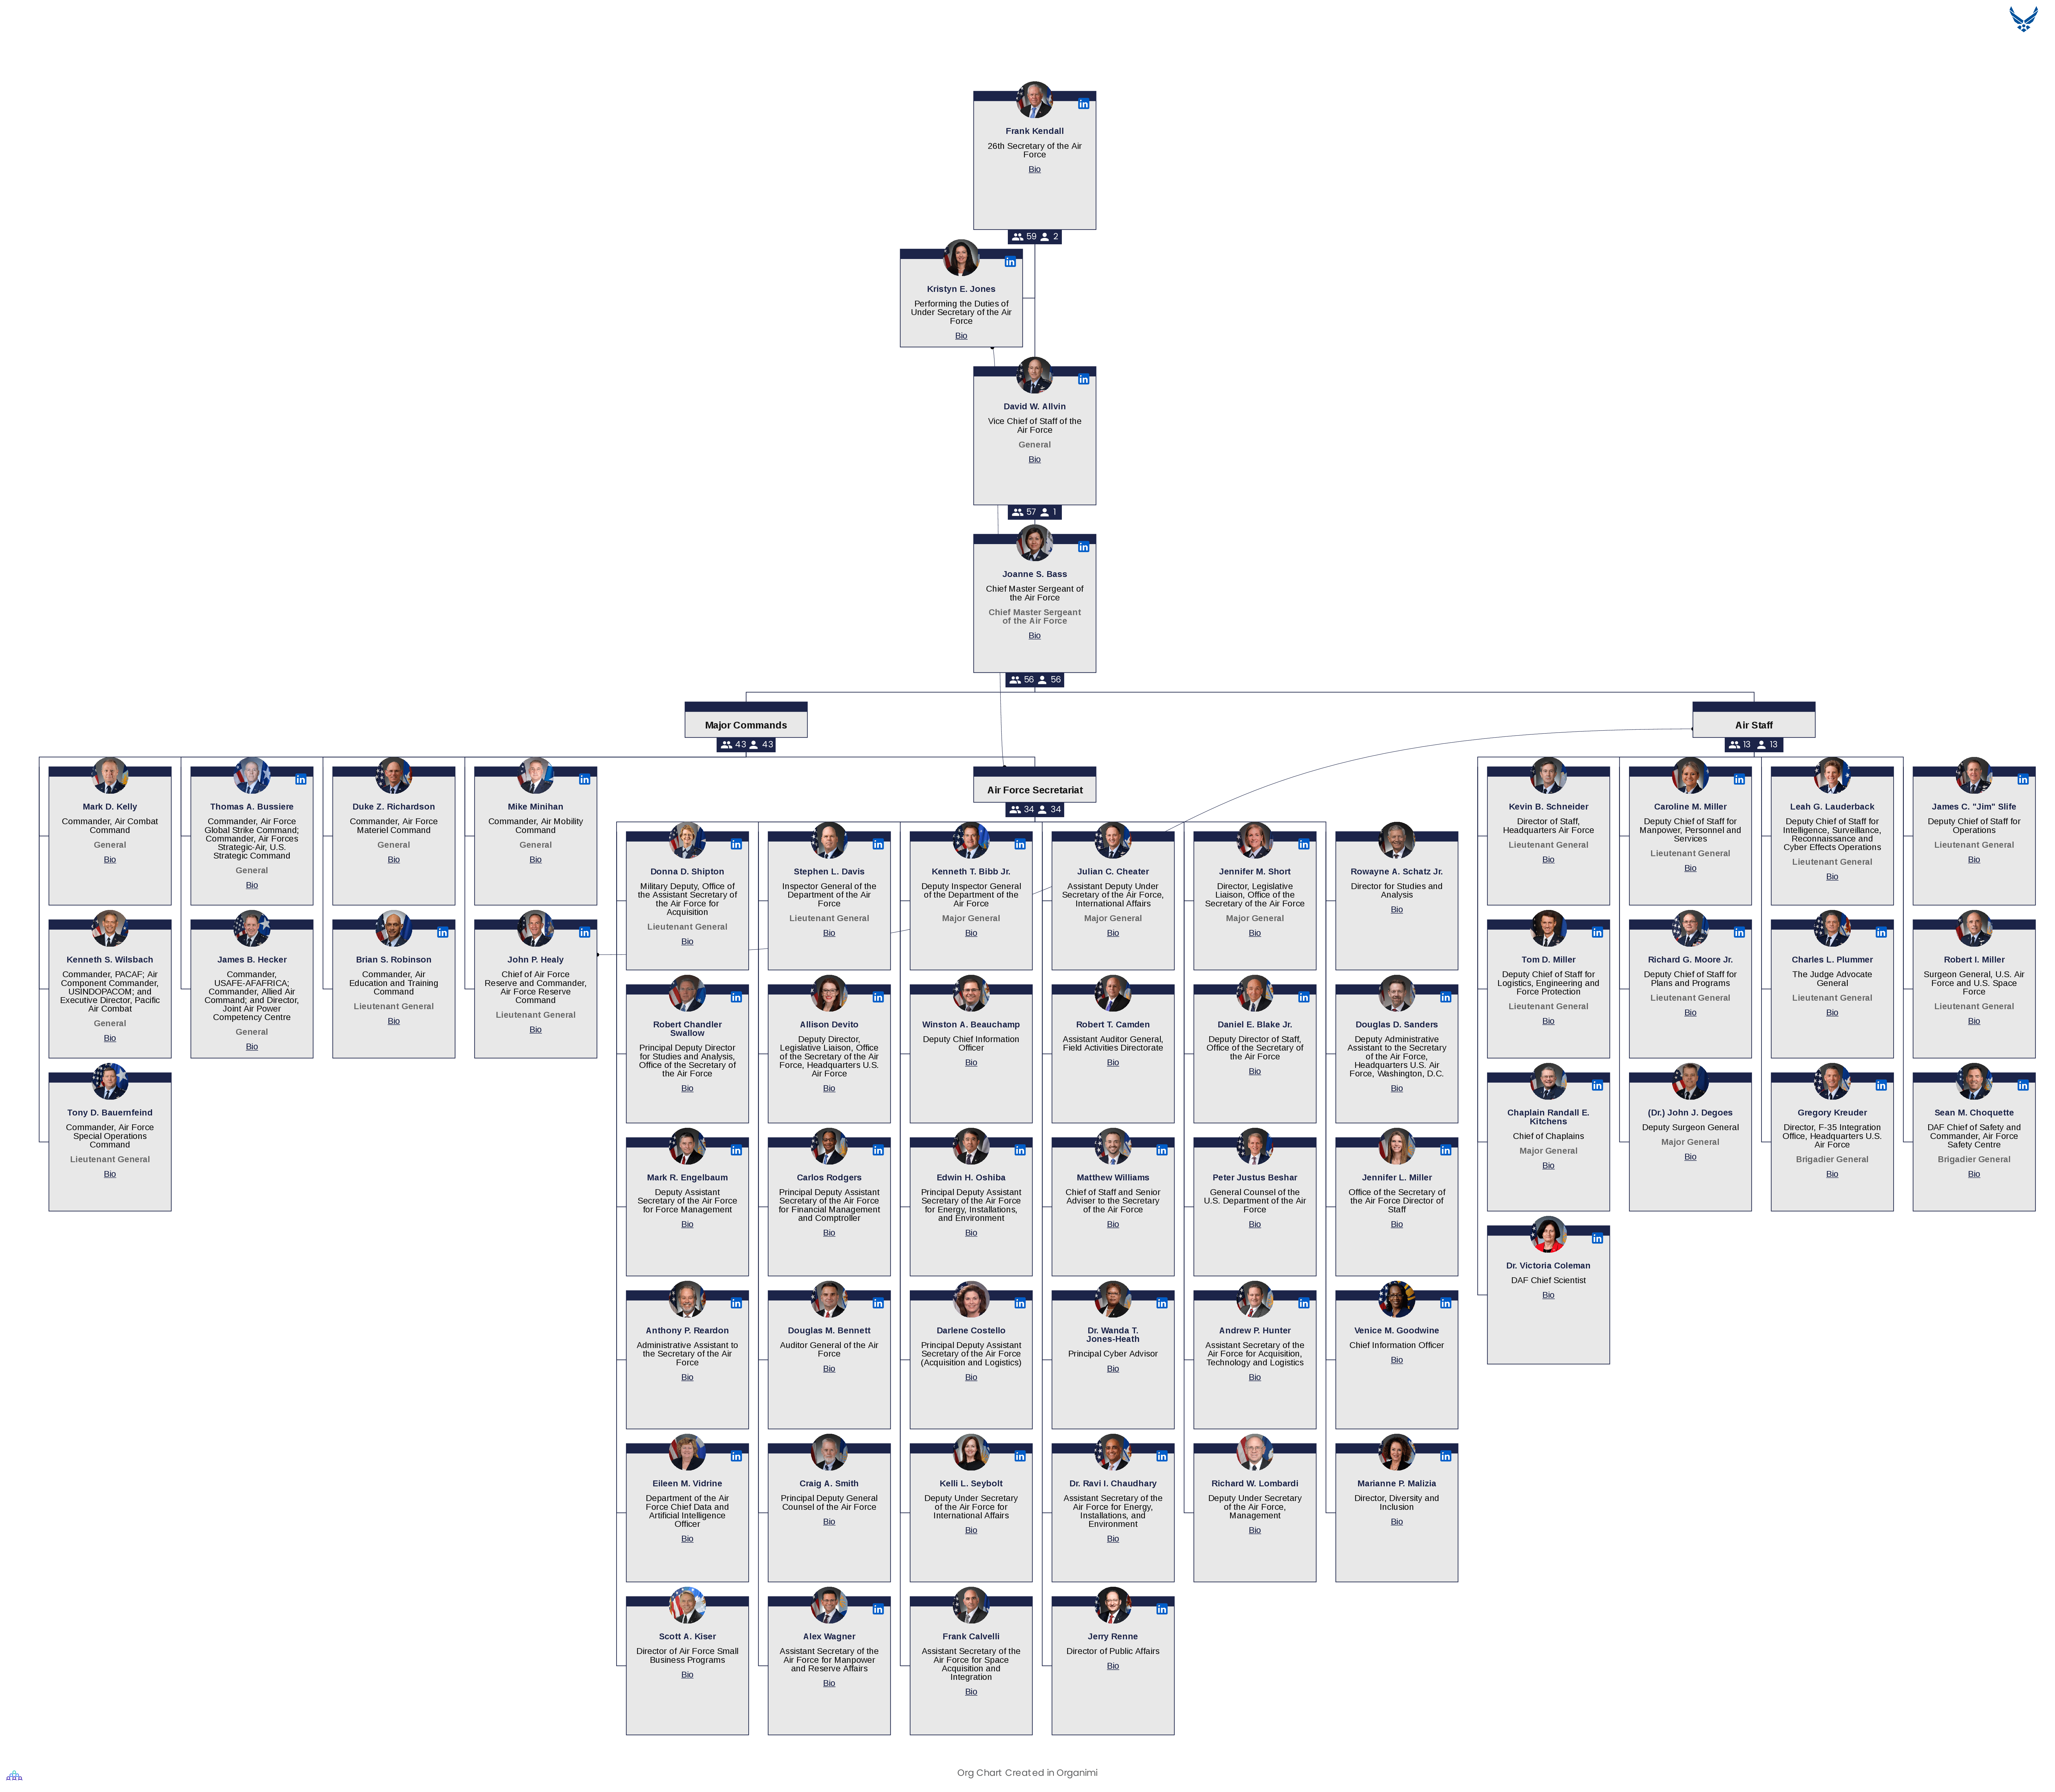 United States Air Force's Organizational Structure Chart